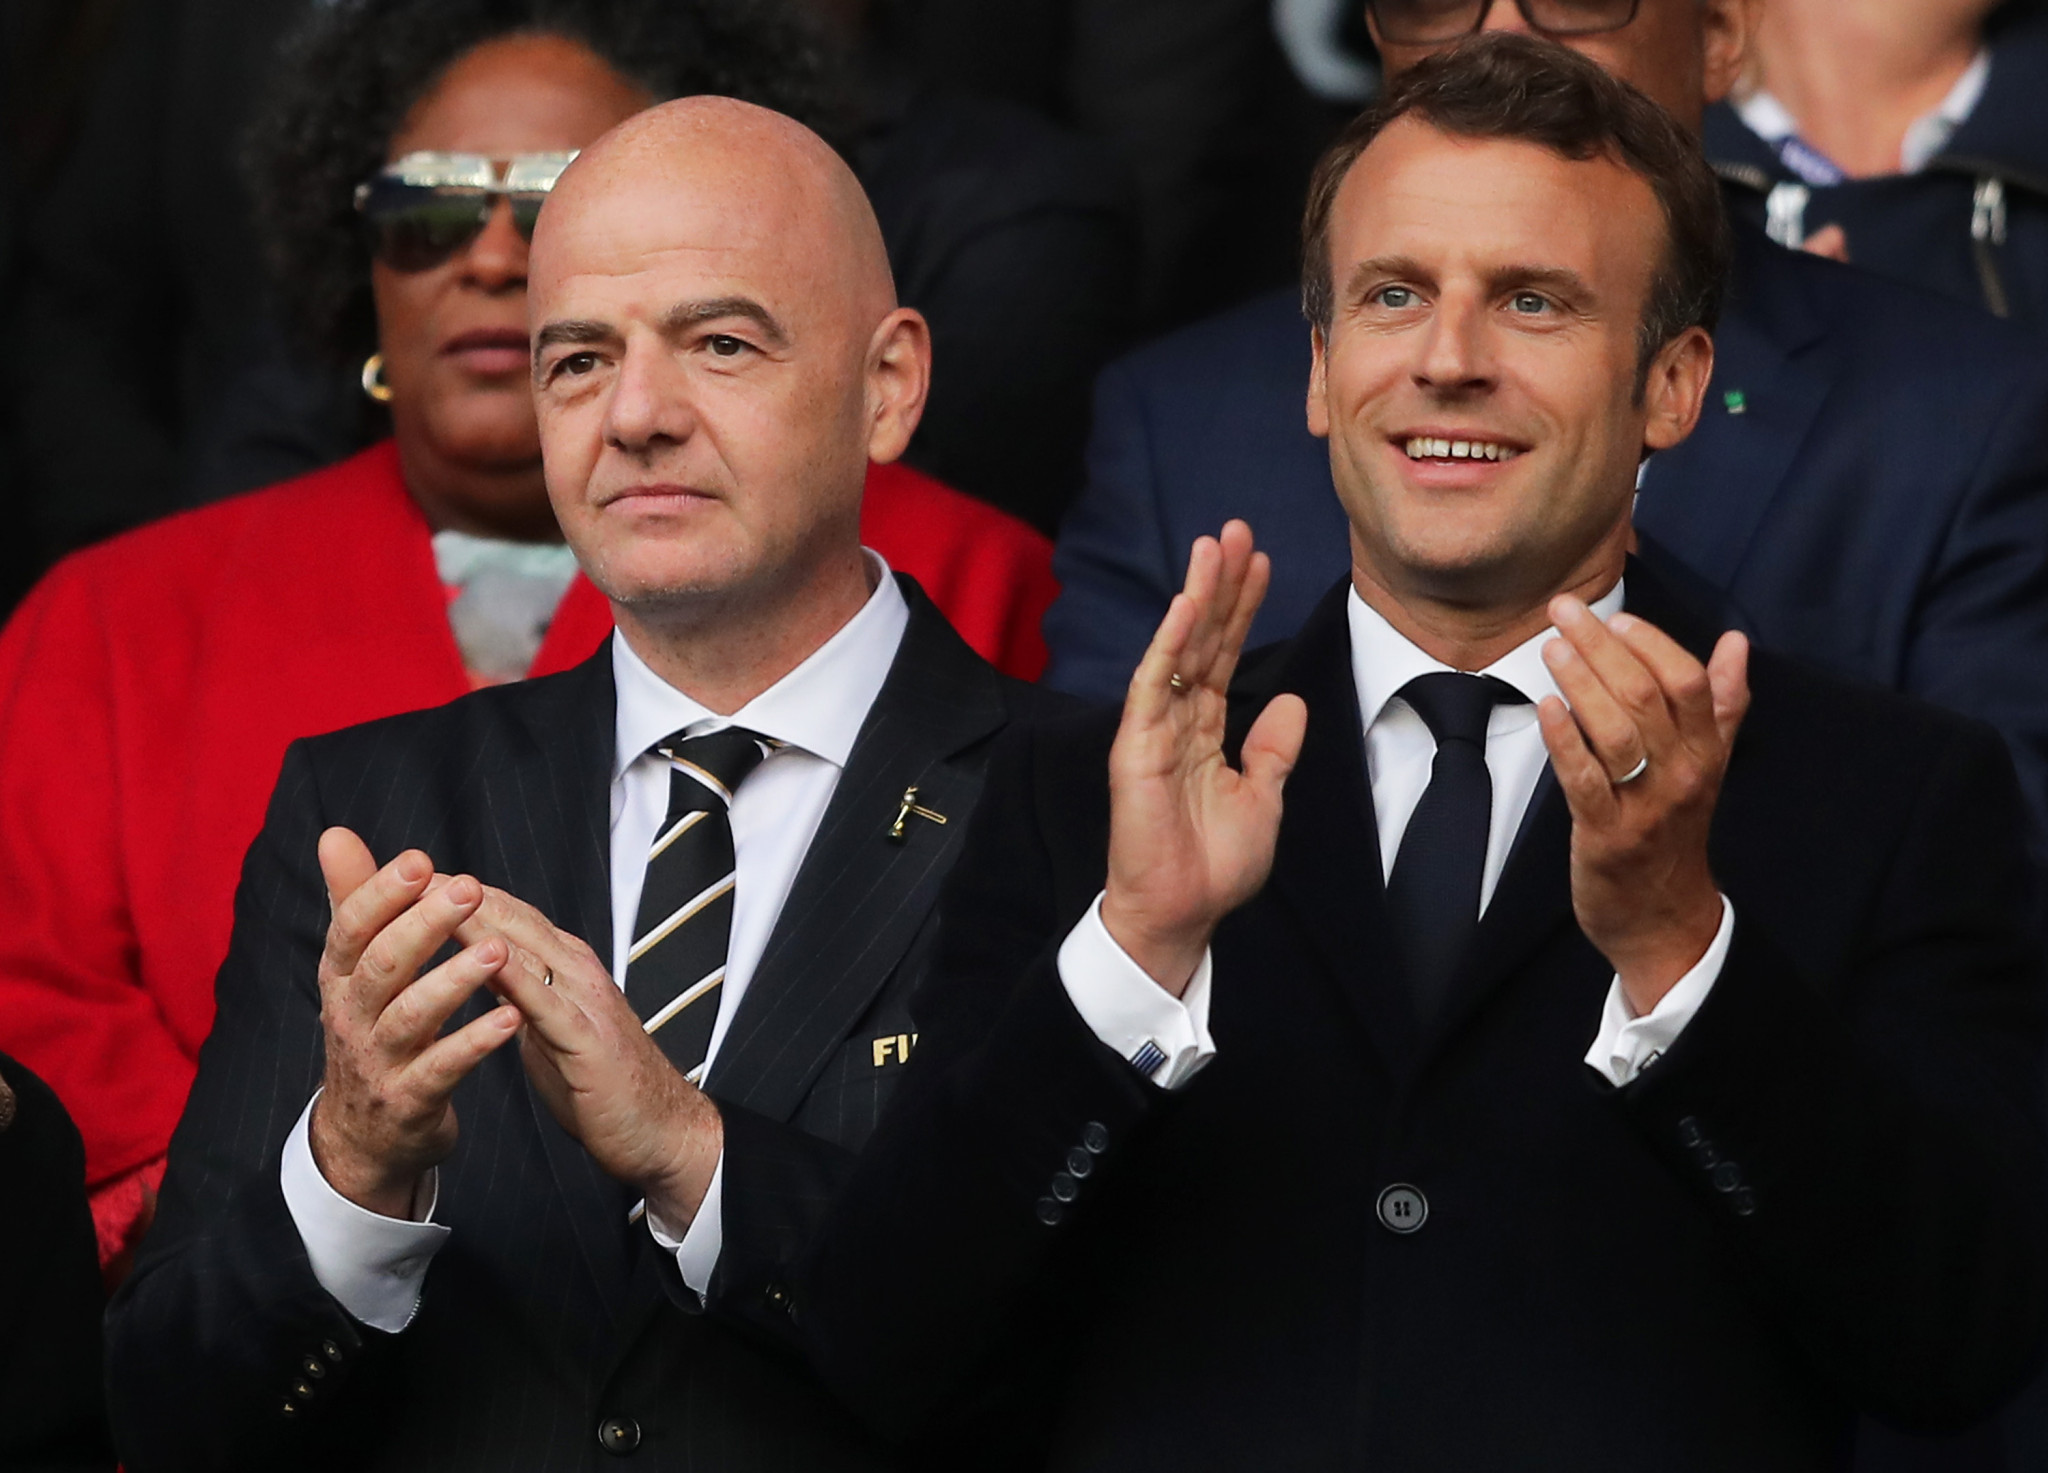 French President Emmanuel Macron was delighted with the result, attending the match alongside FIFA President Gianni Infantino ©Getty Images